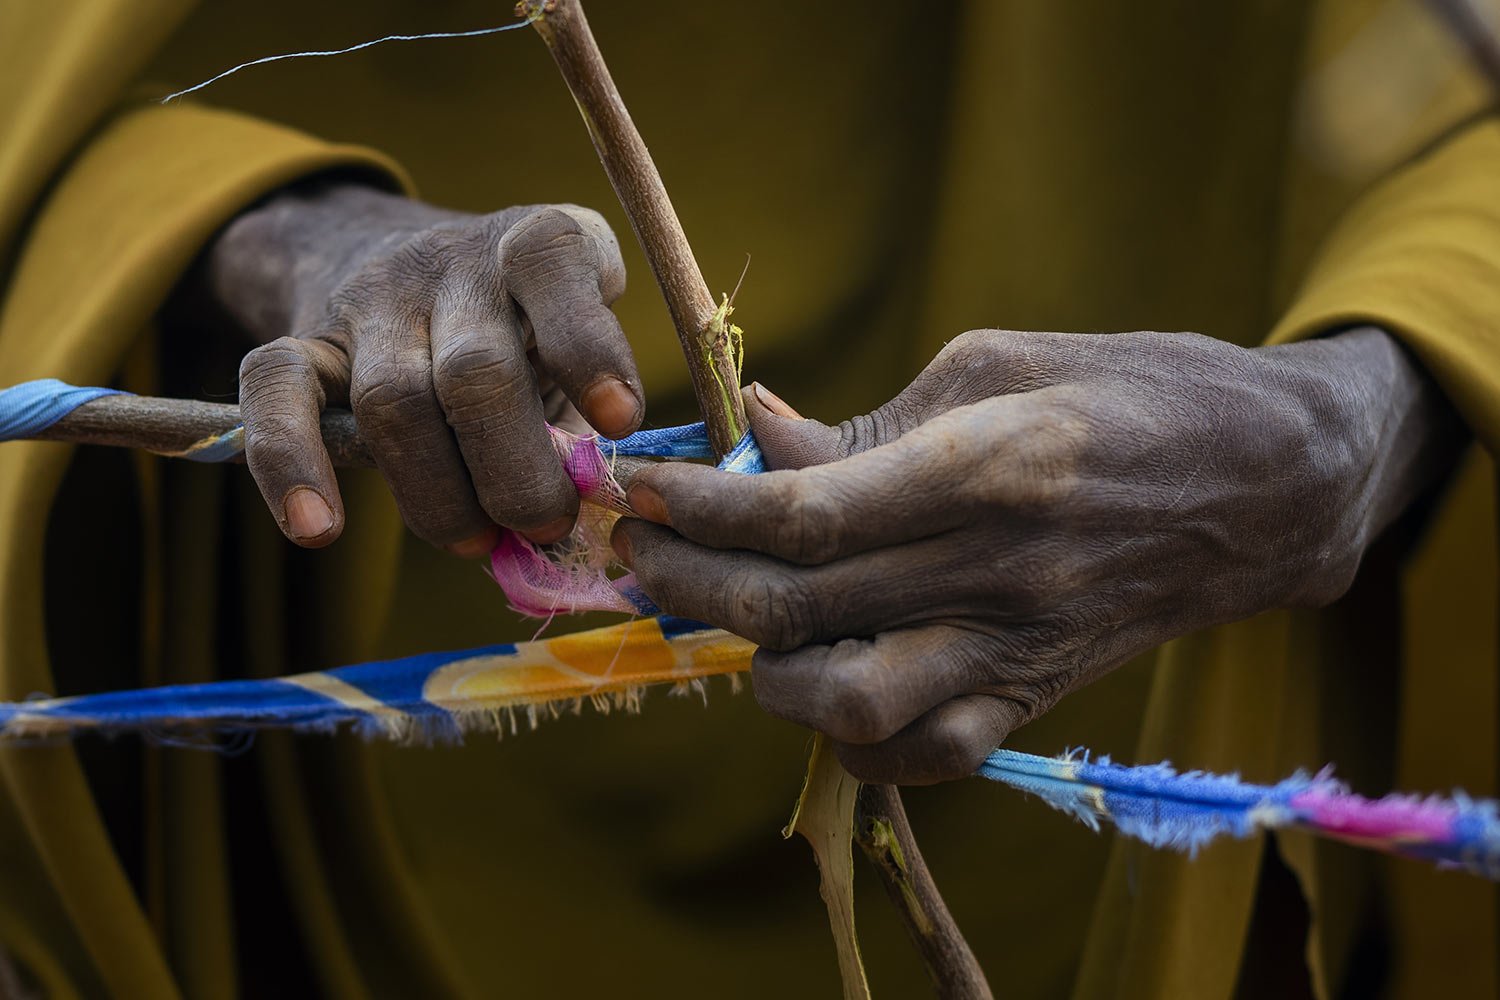  Sticks and cloth are used to make shelter at a camp for displaced people on the outskirts of Dollow, Somalia, Sept. 20, 2022. (AP Photo/Jerome Delay) 